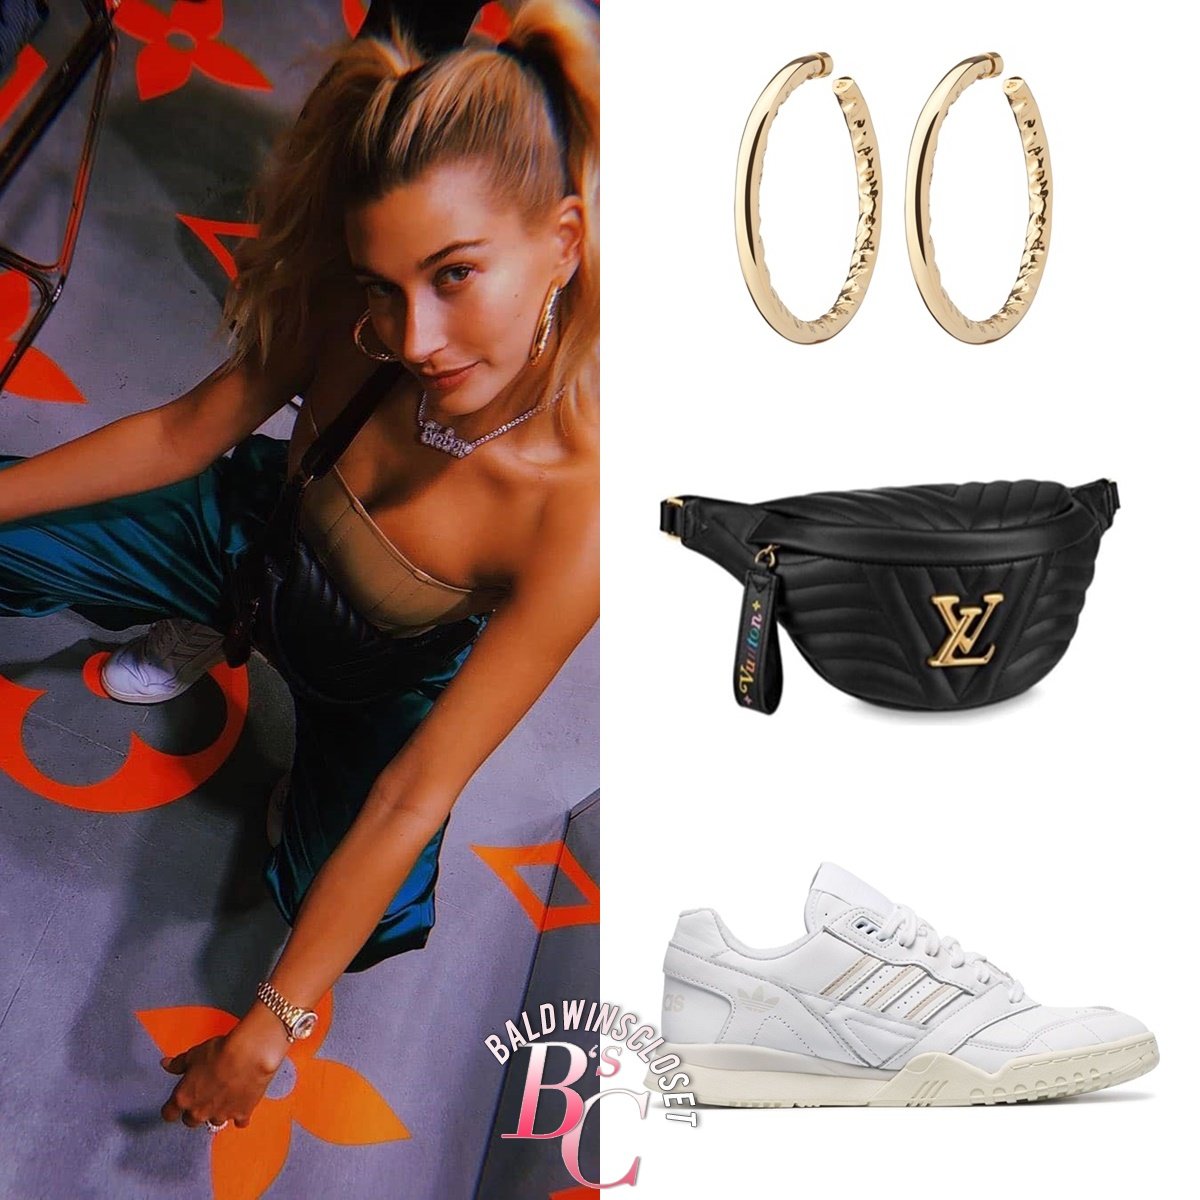 Hailey Bieber's Closet on X: August 1, 2019 - #JustinBieber posted this  cute photo of him & hails. #HaileyBieber wore a #AreYouAmI Corset for  $295.00, #Balenciaga Pajama Pants for $850.00, #JenniferFisher Hoops